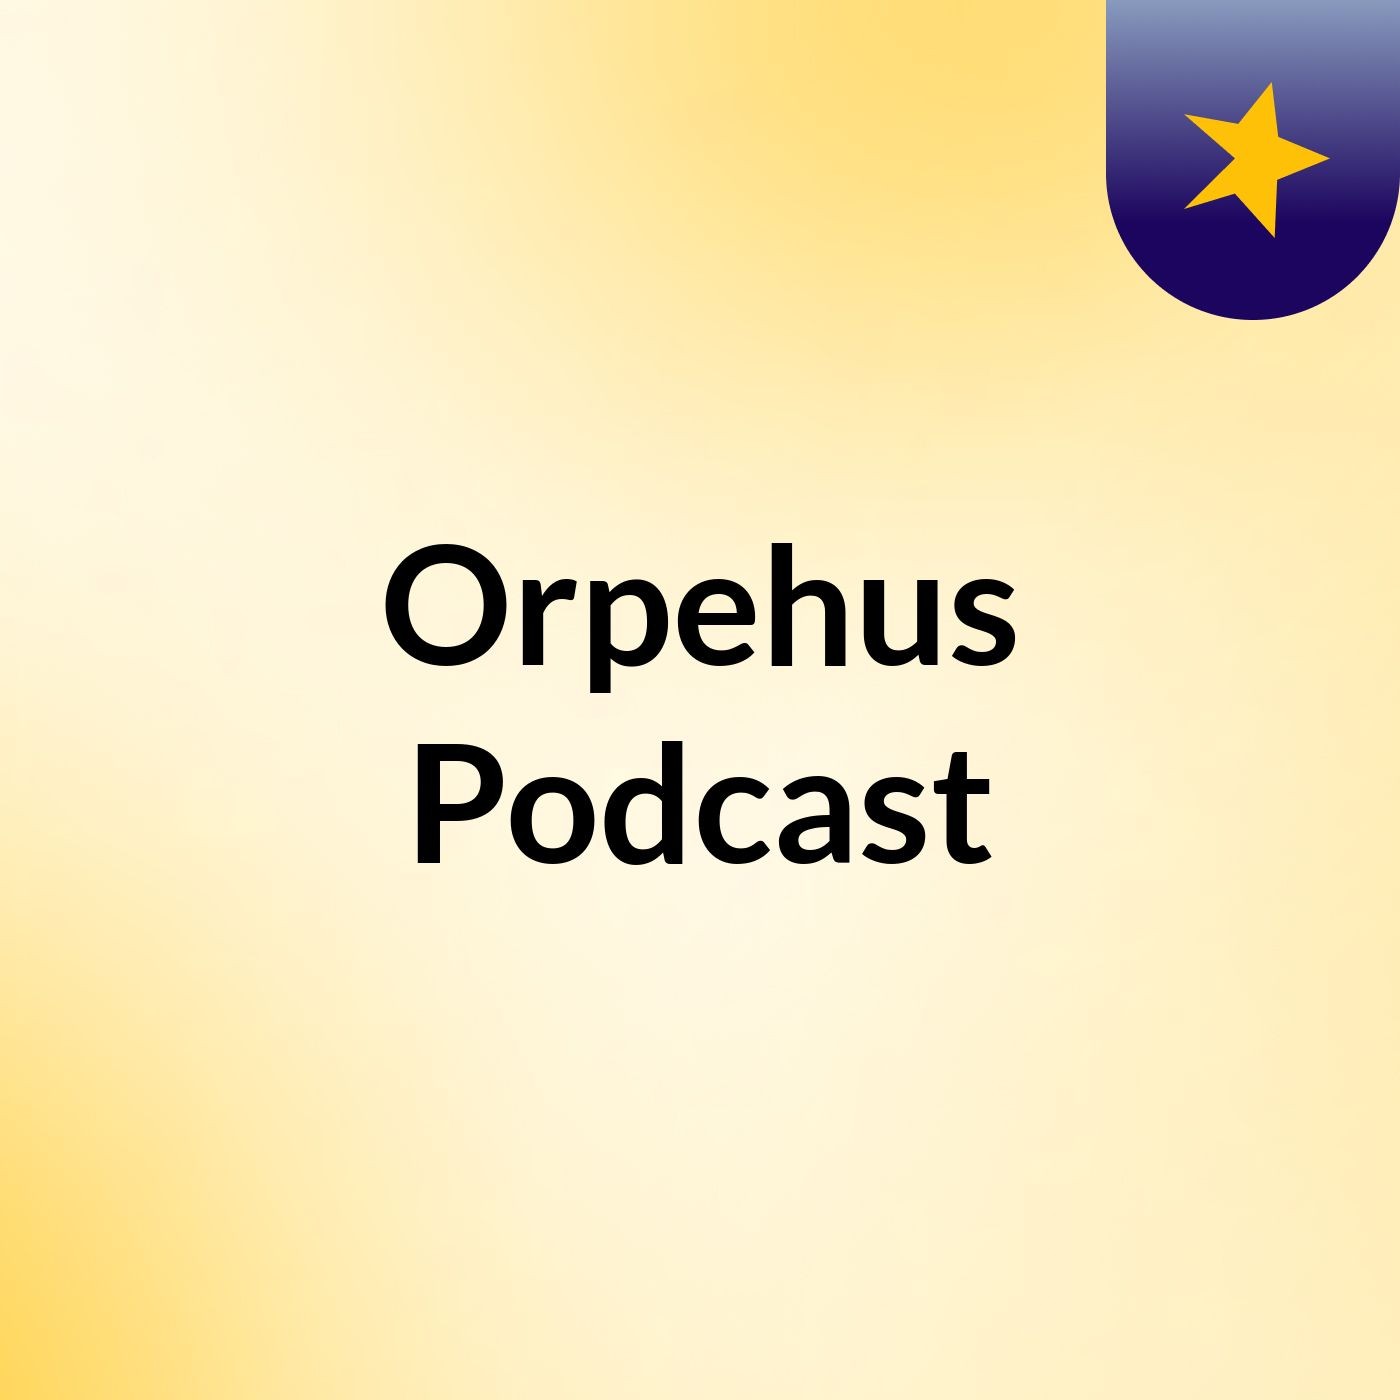 Orpehus Podcast